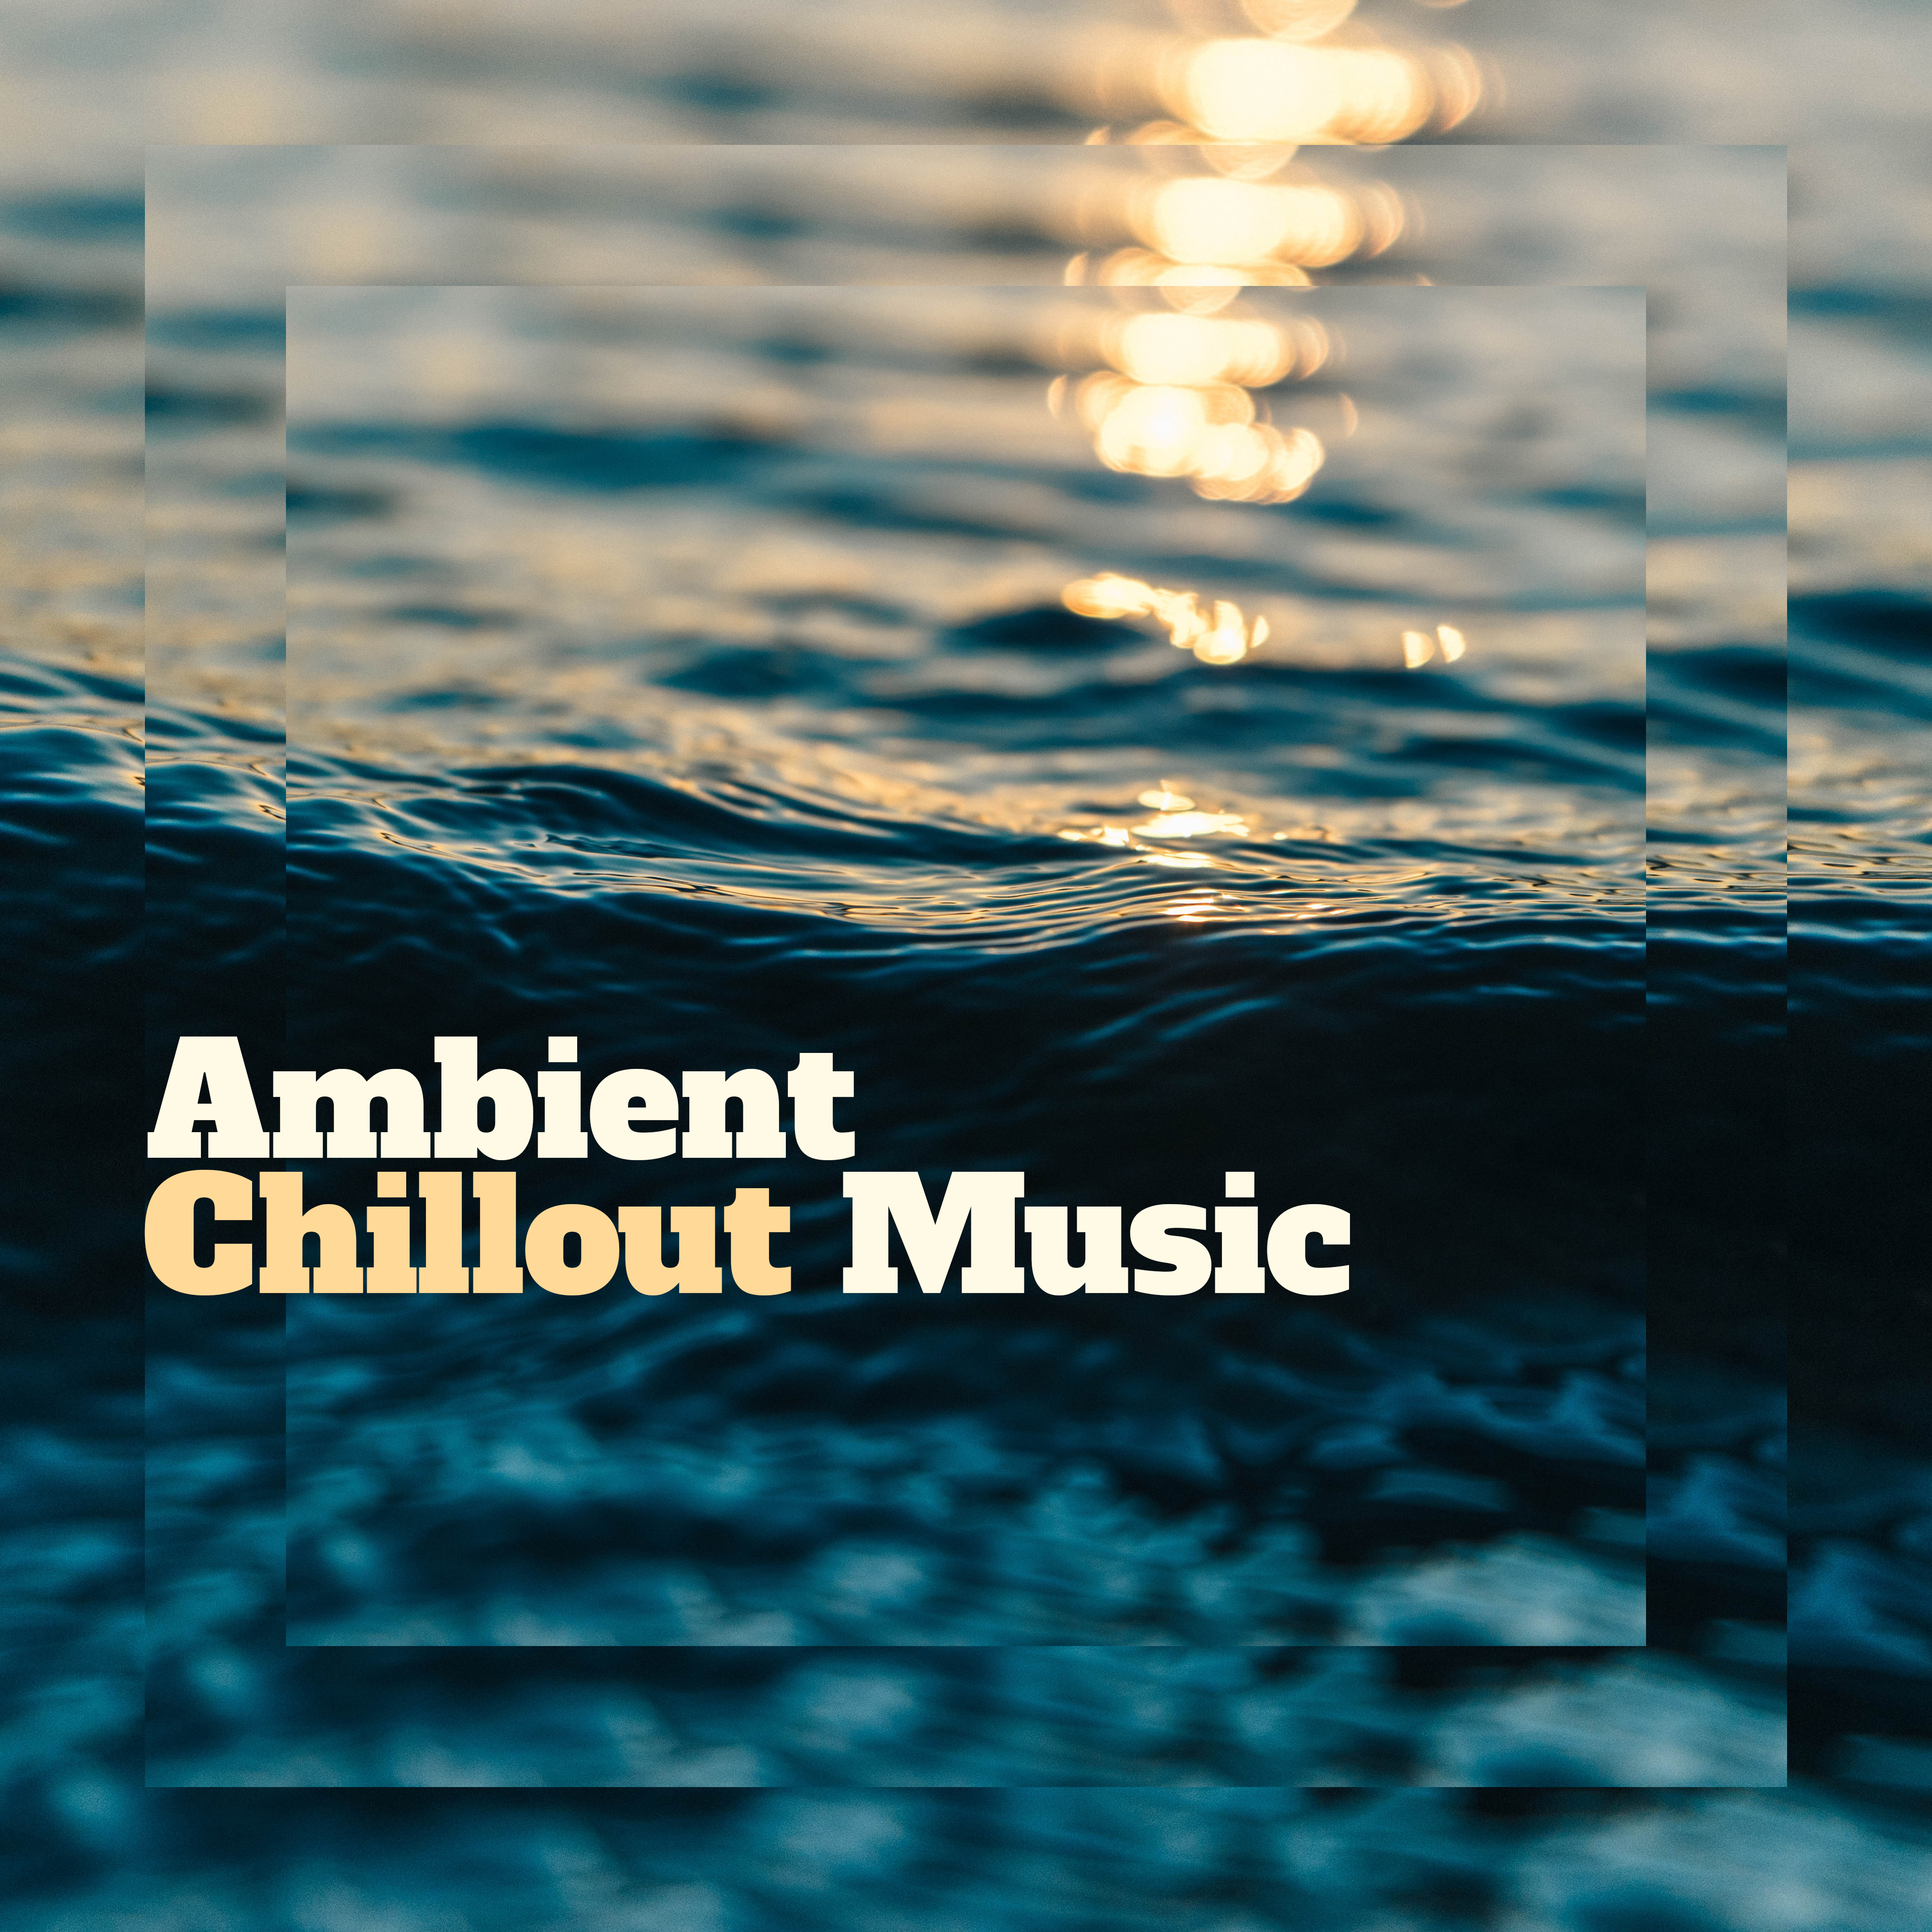 Ambient Chillout Music  Chillout Downbeats Lounge, Summer Hits 2017, Chill Out Music